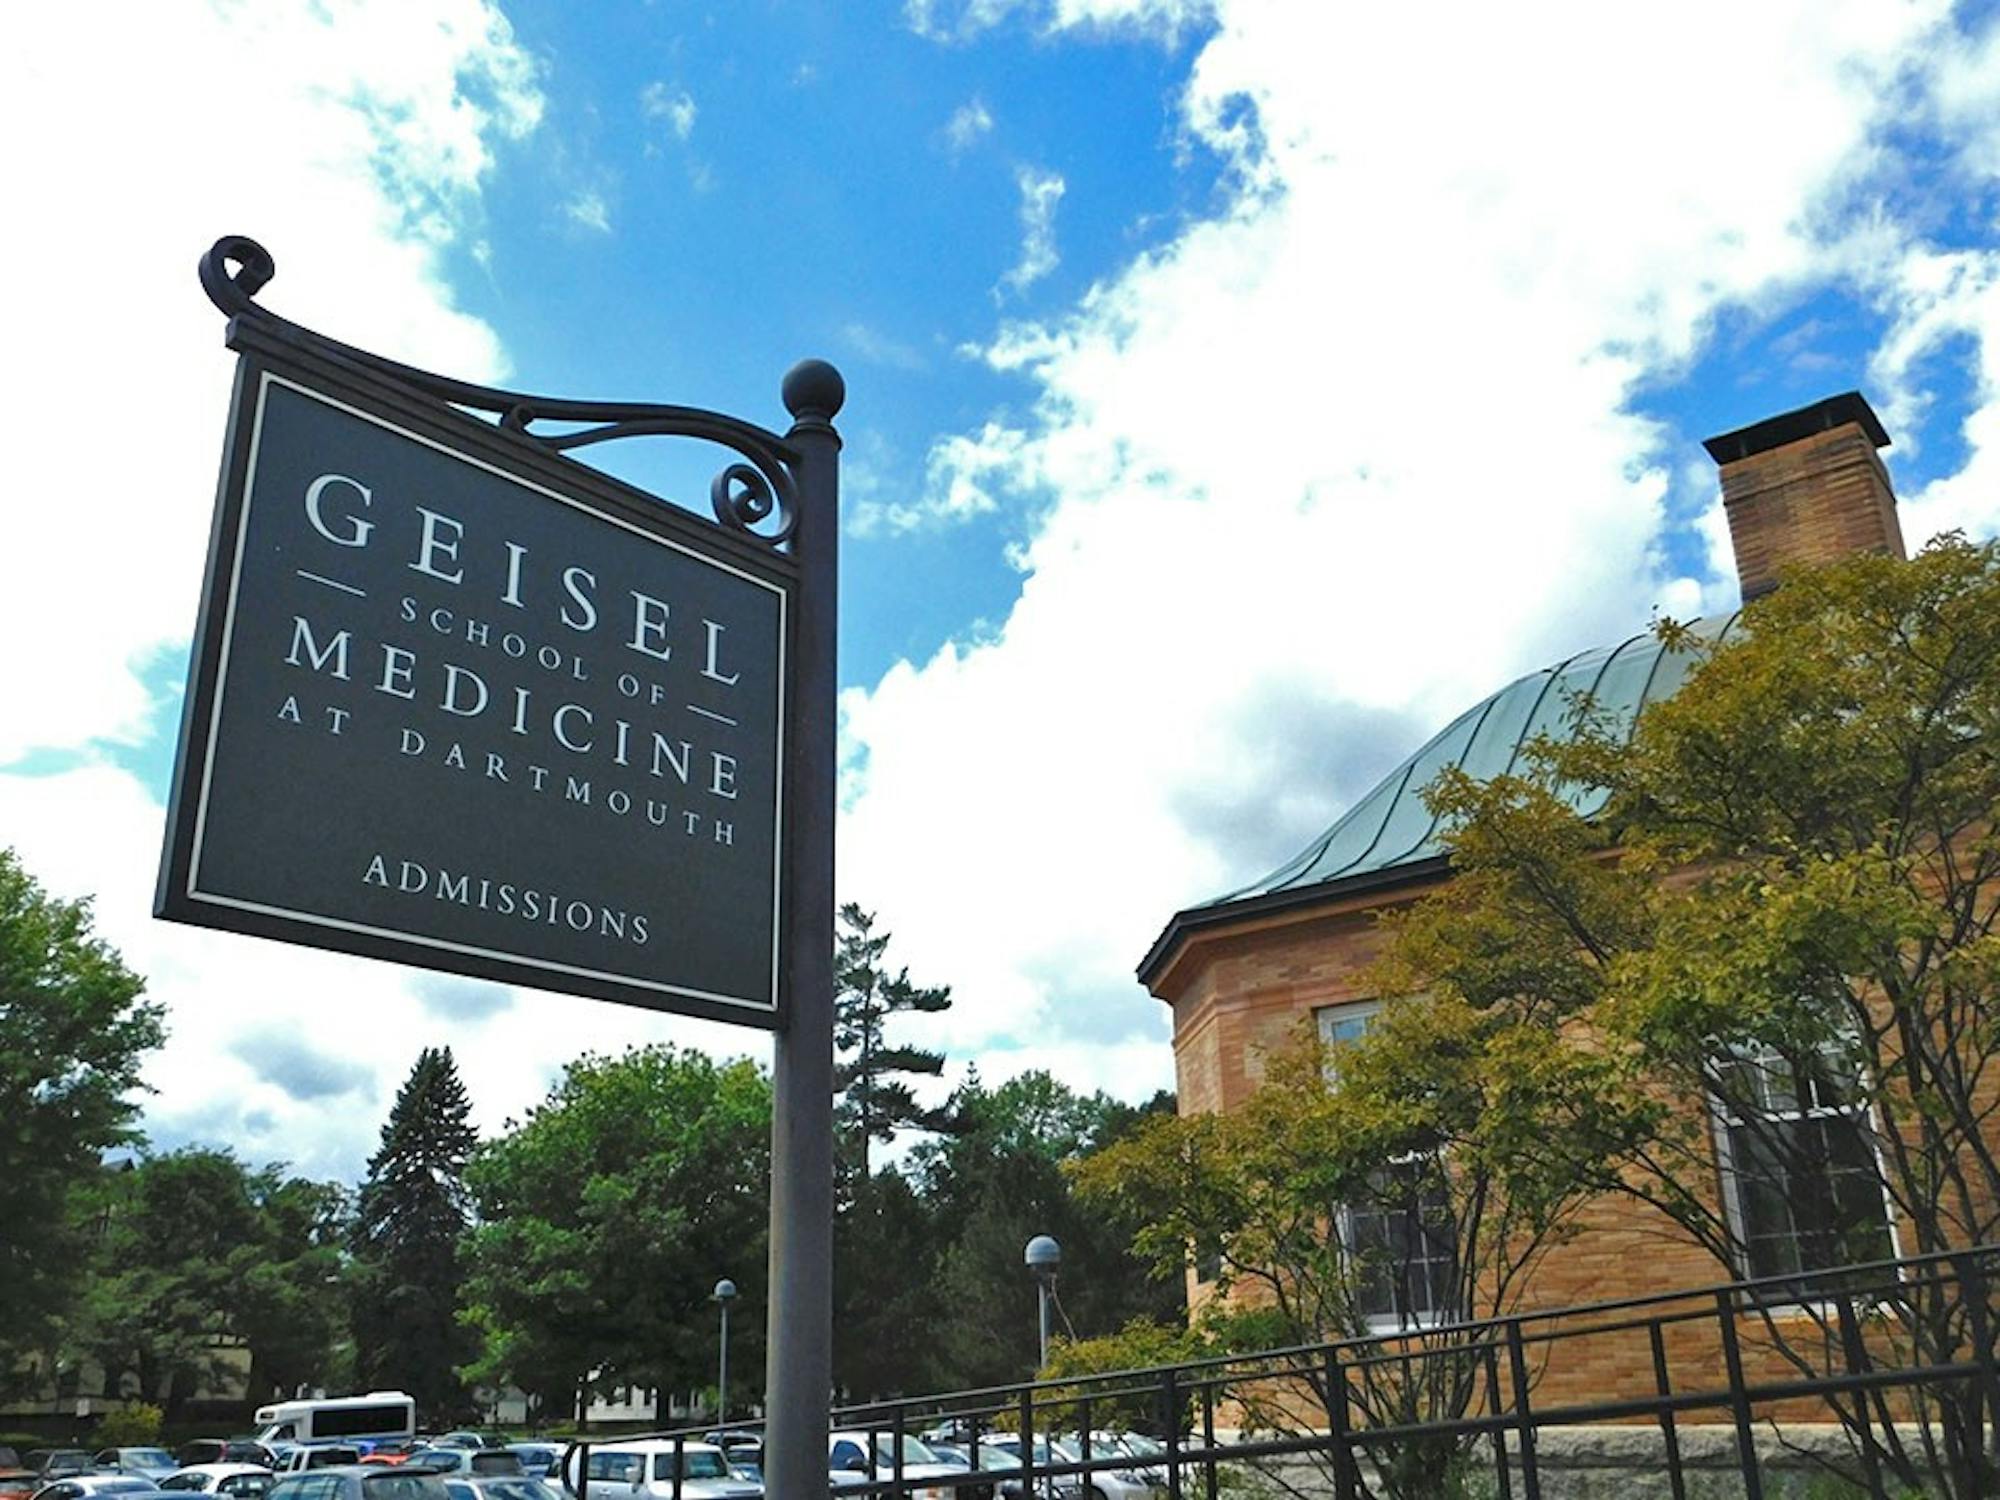 Geisel School of Medicine has departments involved with iTarget.